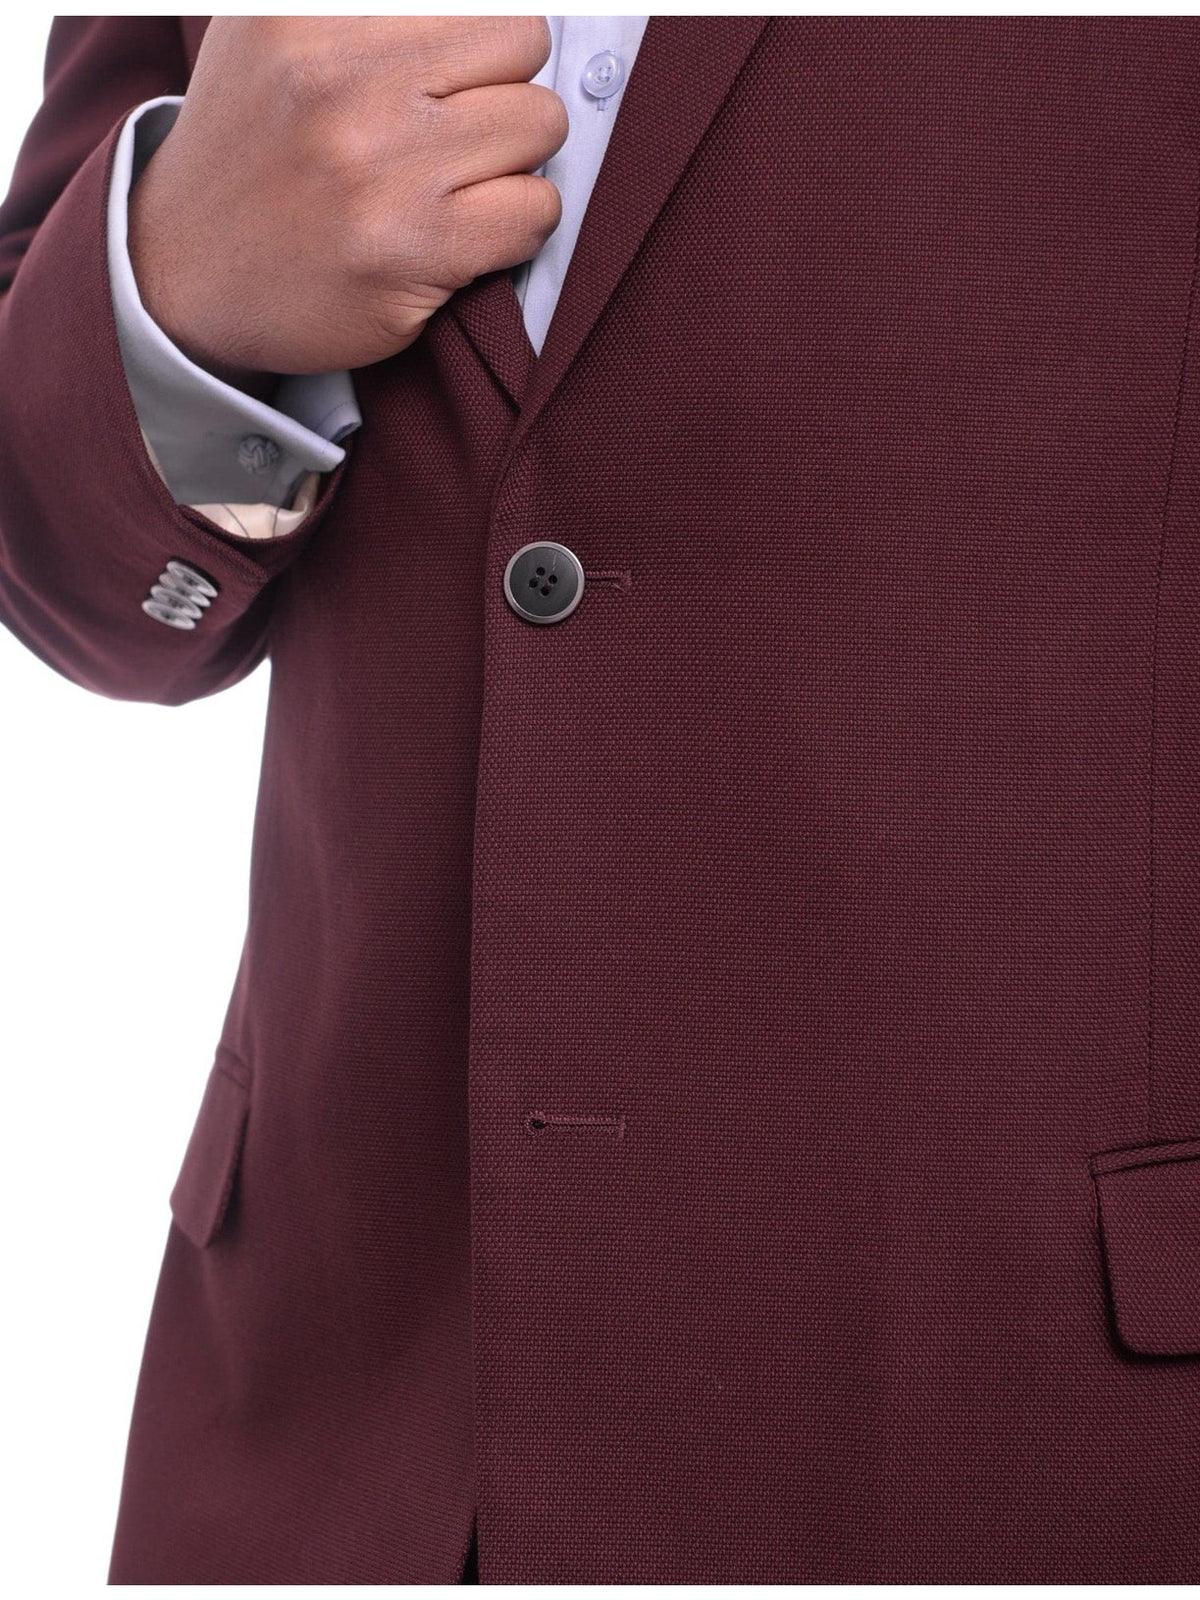 Caravelli BLAZERS Caravelli Classic Fit Hopsack Weave Burgundy Two Button Stretch Blazer Sportcoat